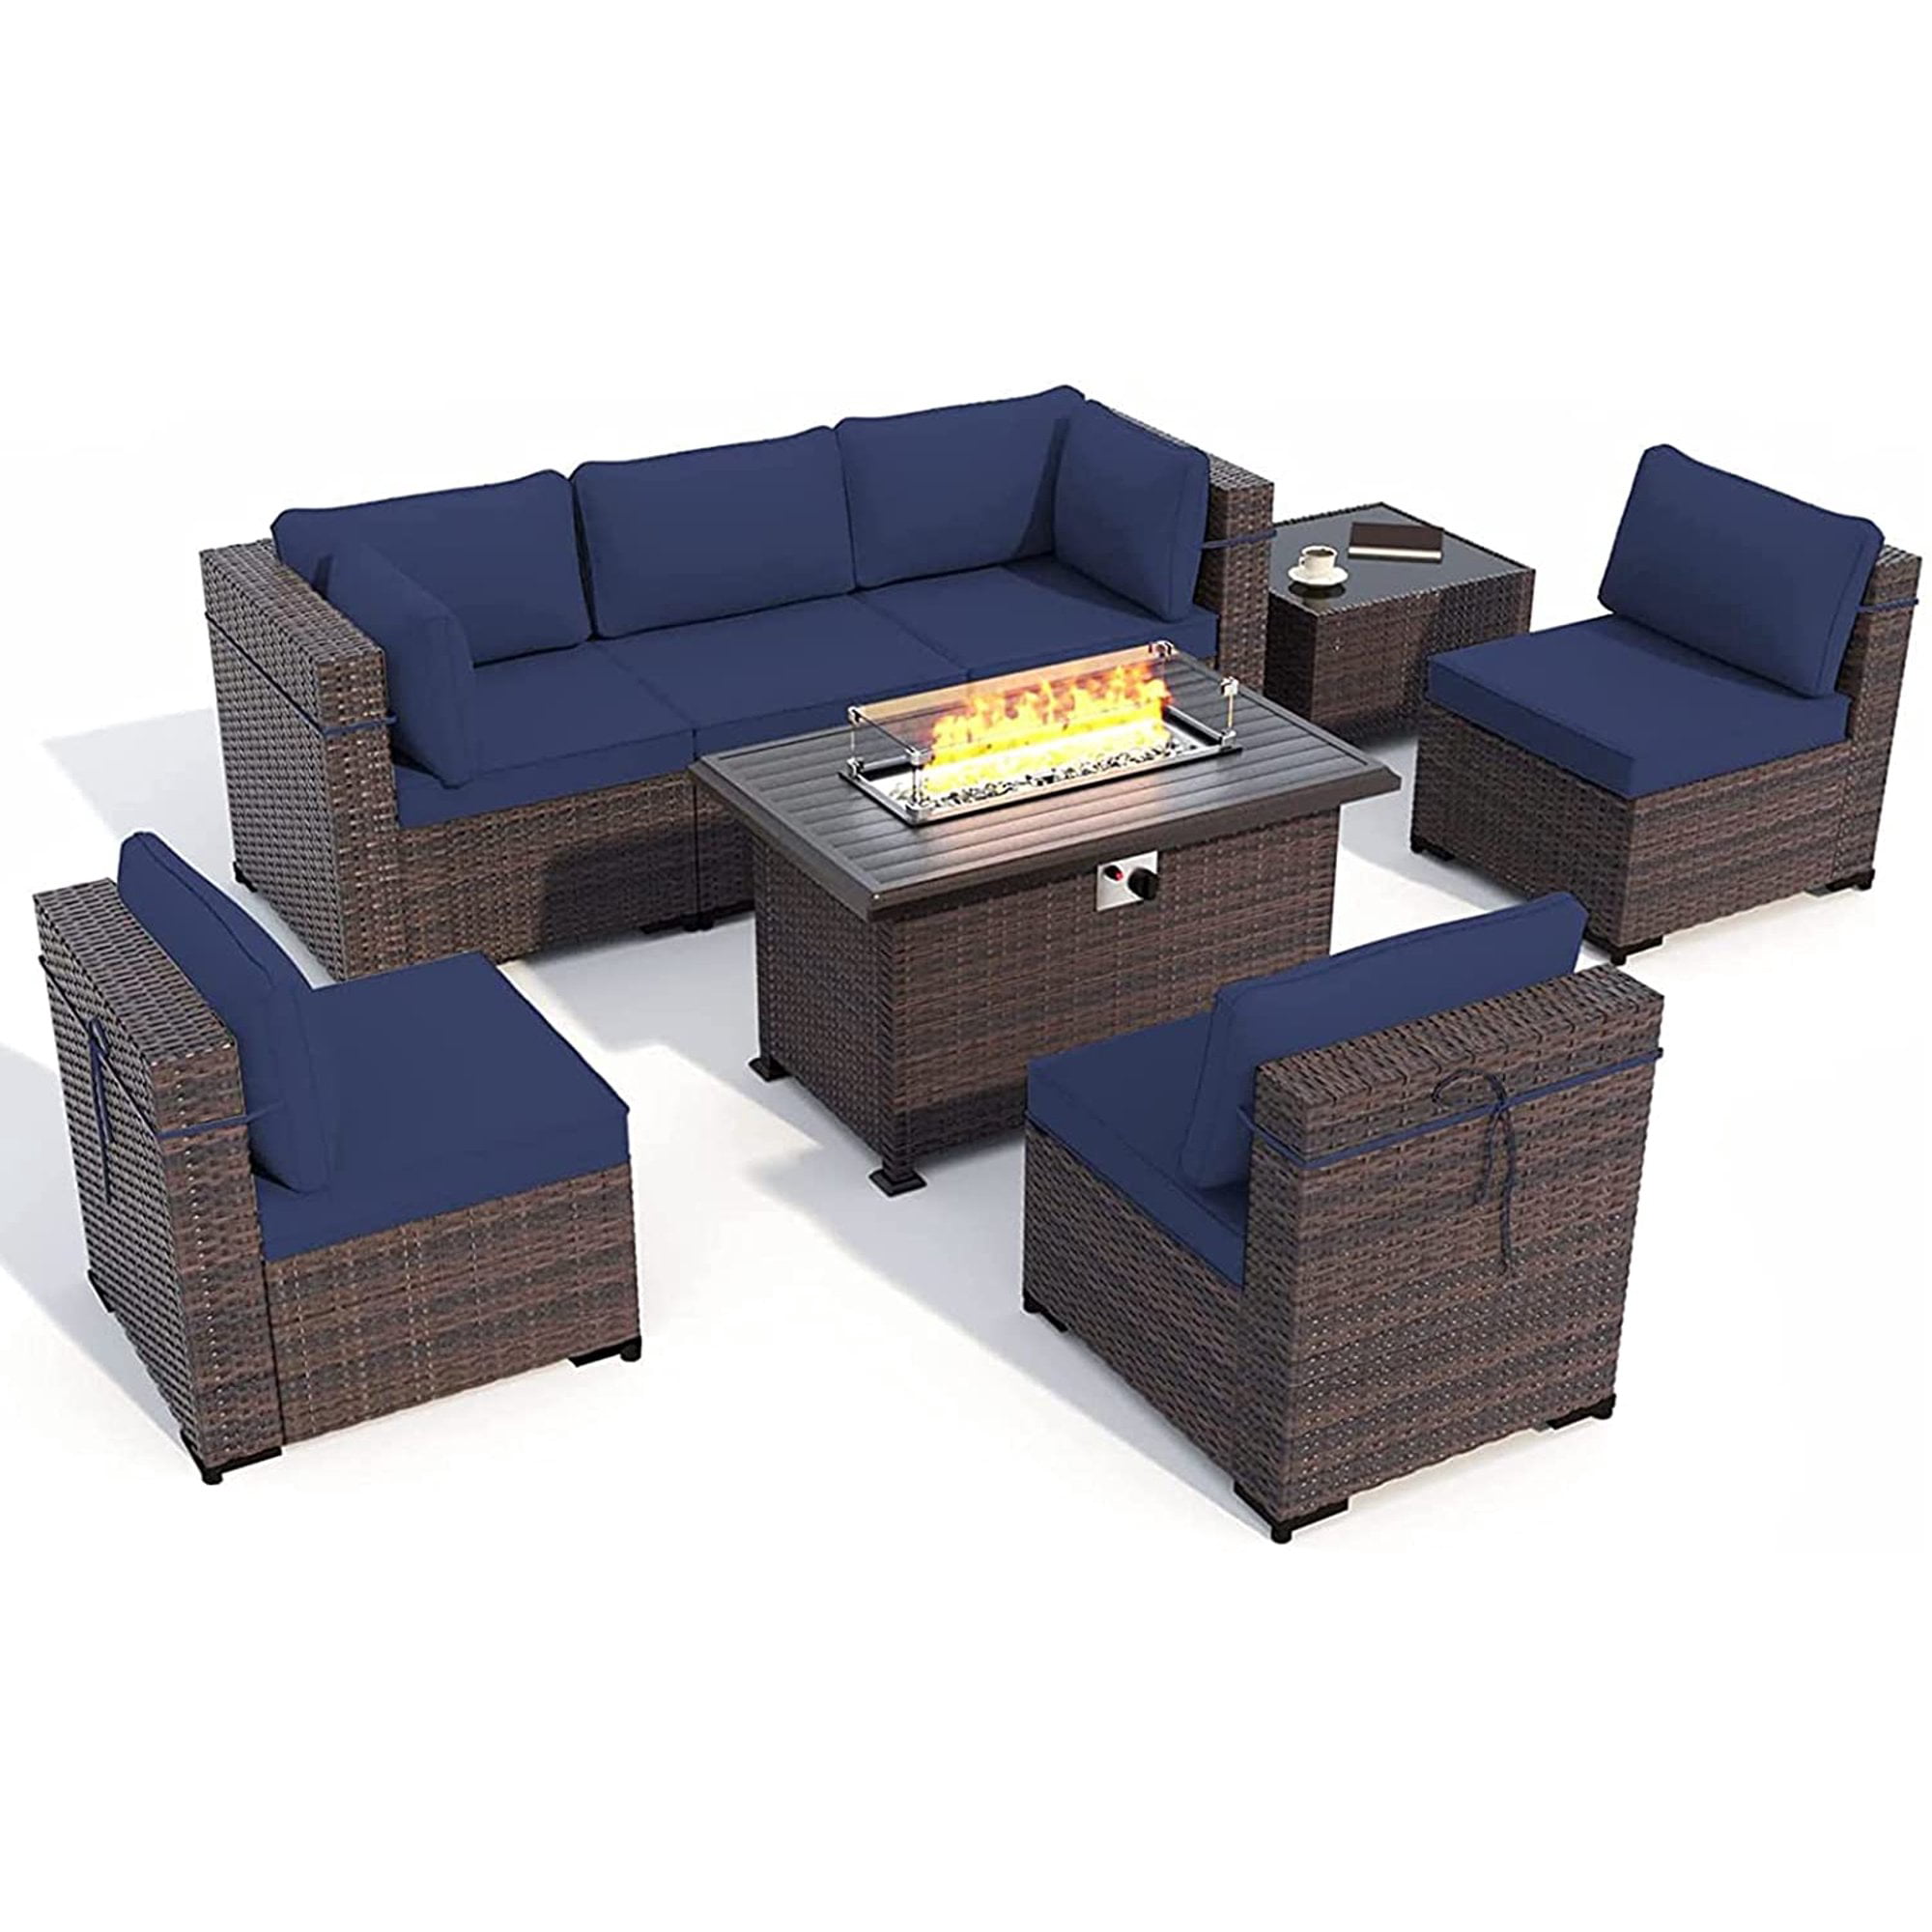 Kullavik 8 Pieces Outdoor Furniture Set with 43" Gas Propane Fire Pit Table PE Wicker Rattan Sectional Sofa Patio Conversation Sets,Navy Blue - image 2 of 7